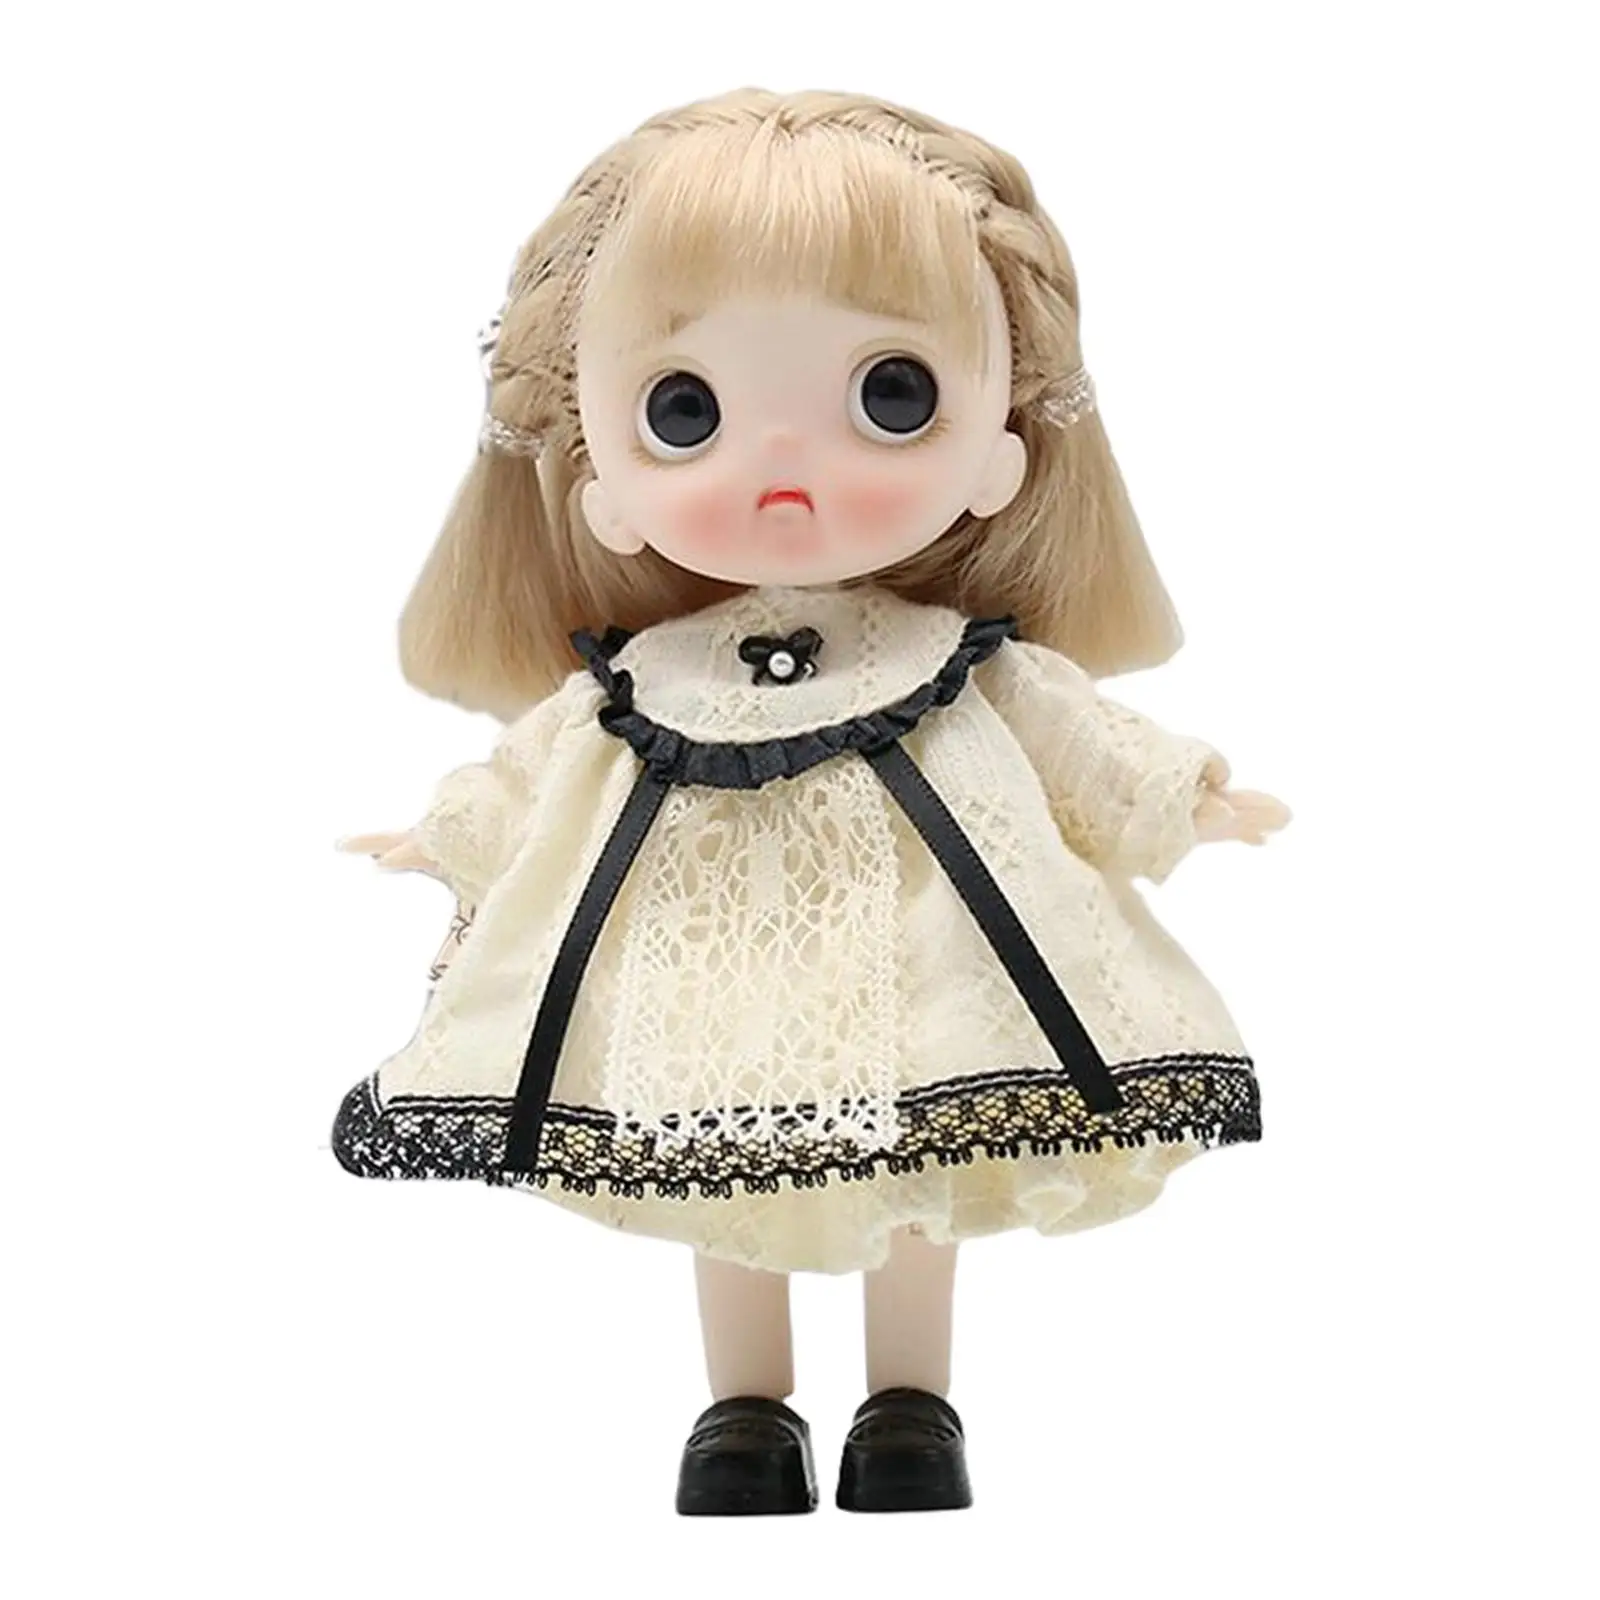 Ball Joints Doll 14cm Kids Girls Toys Dress up Accessories makeup Doll for Birthday